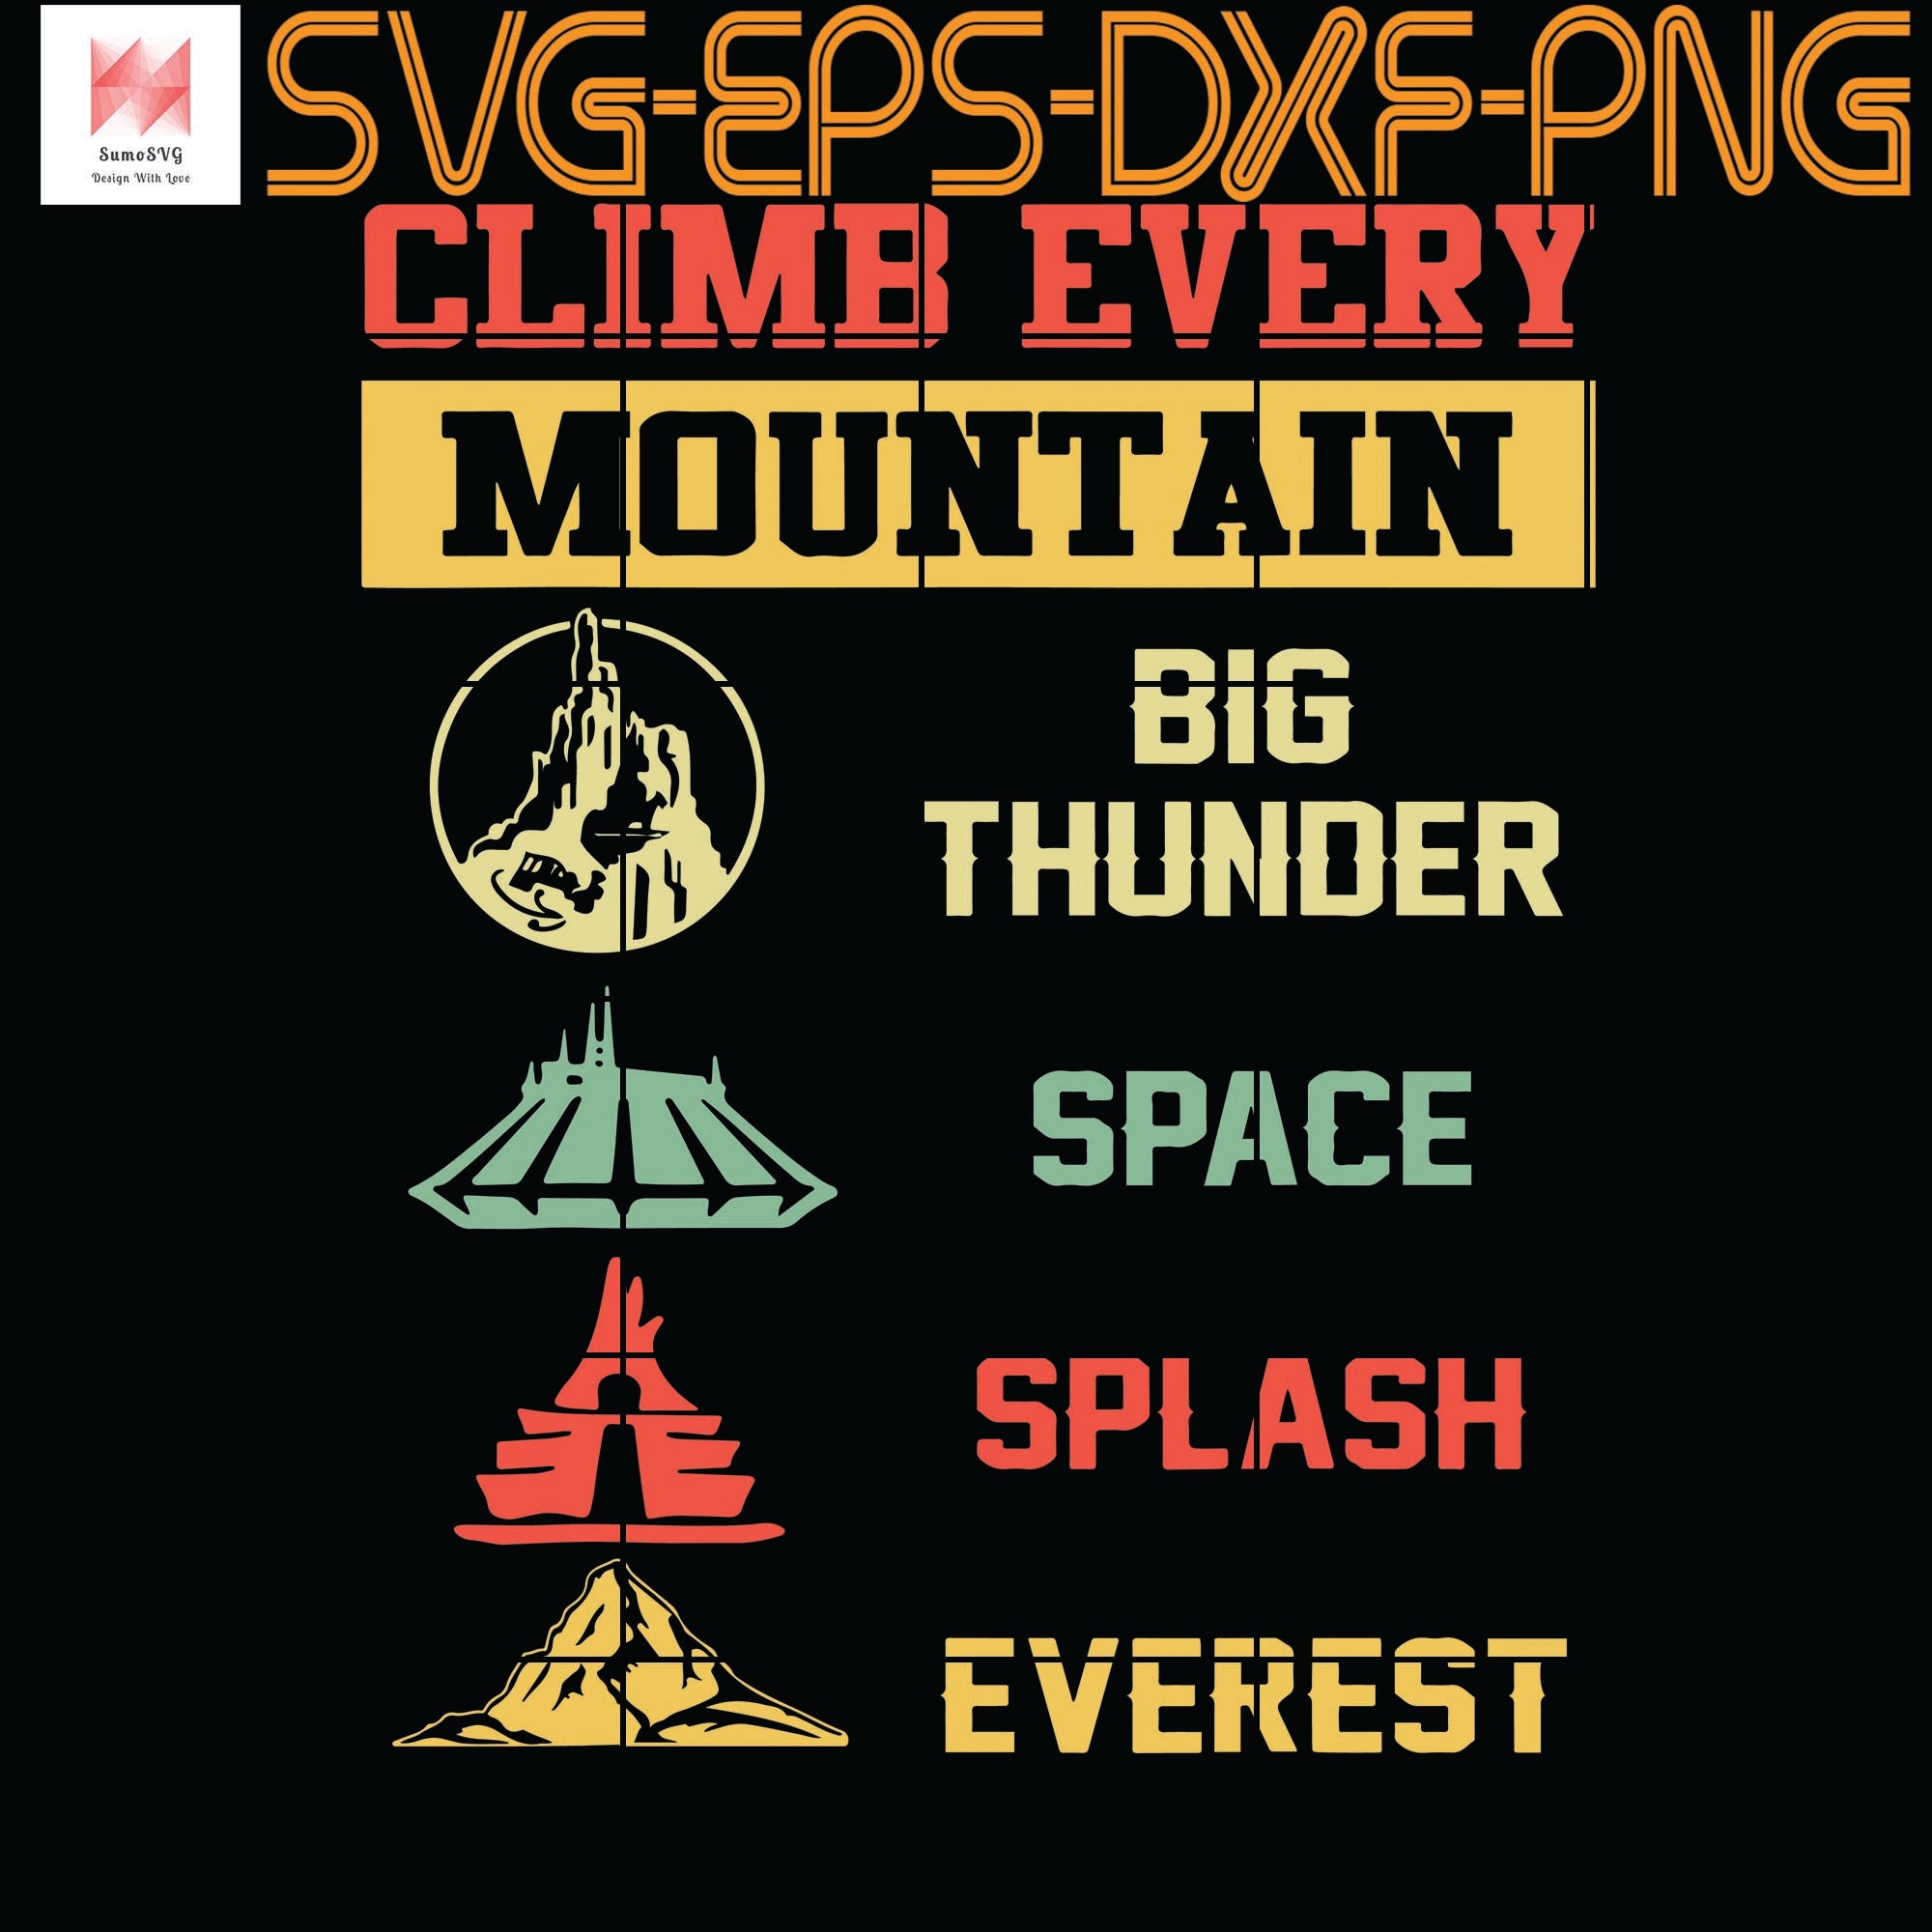 Climb Every Mountain Big Thunder Space Splashs Everests Quotes Svg Sumosvg